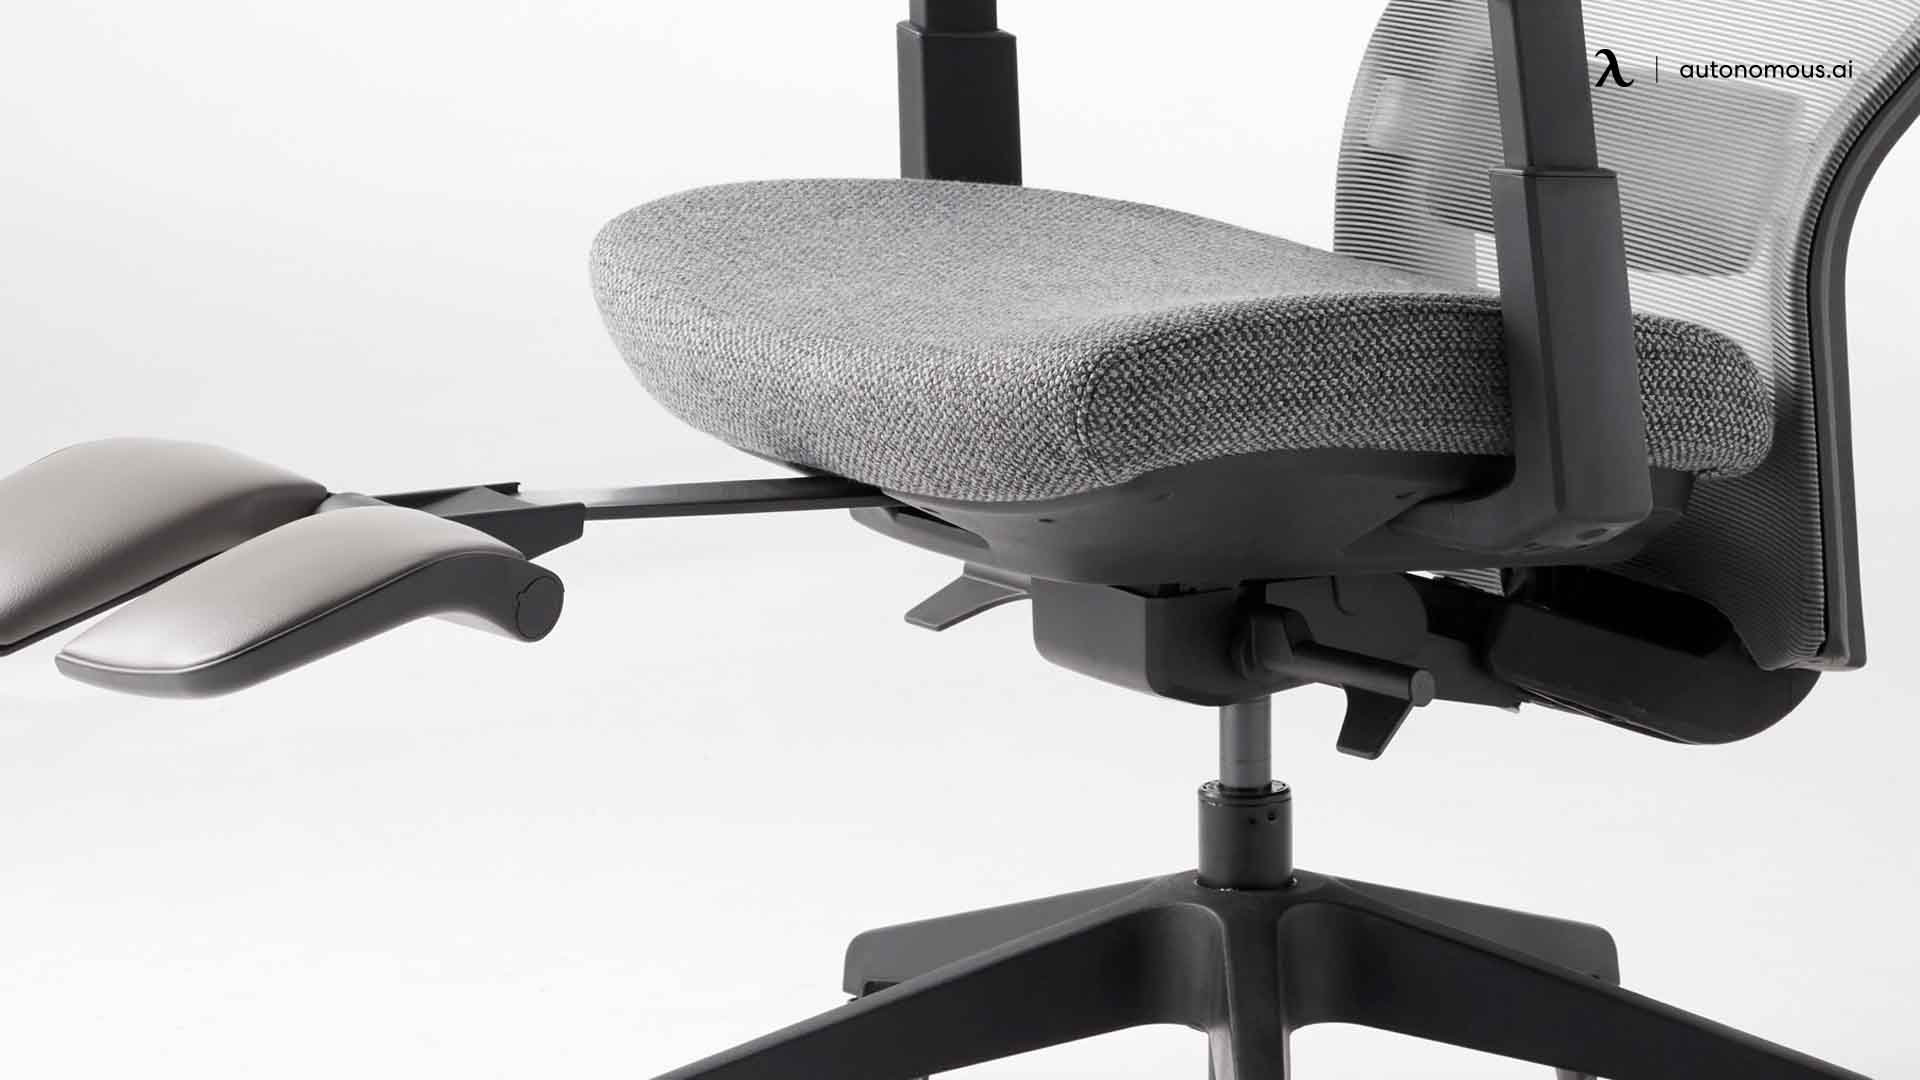 6 Ergonomic Features In An Office Chair For Short People